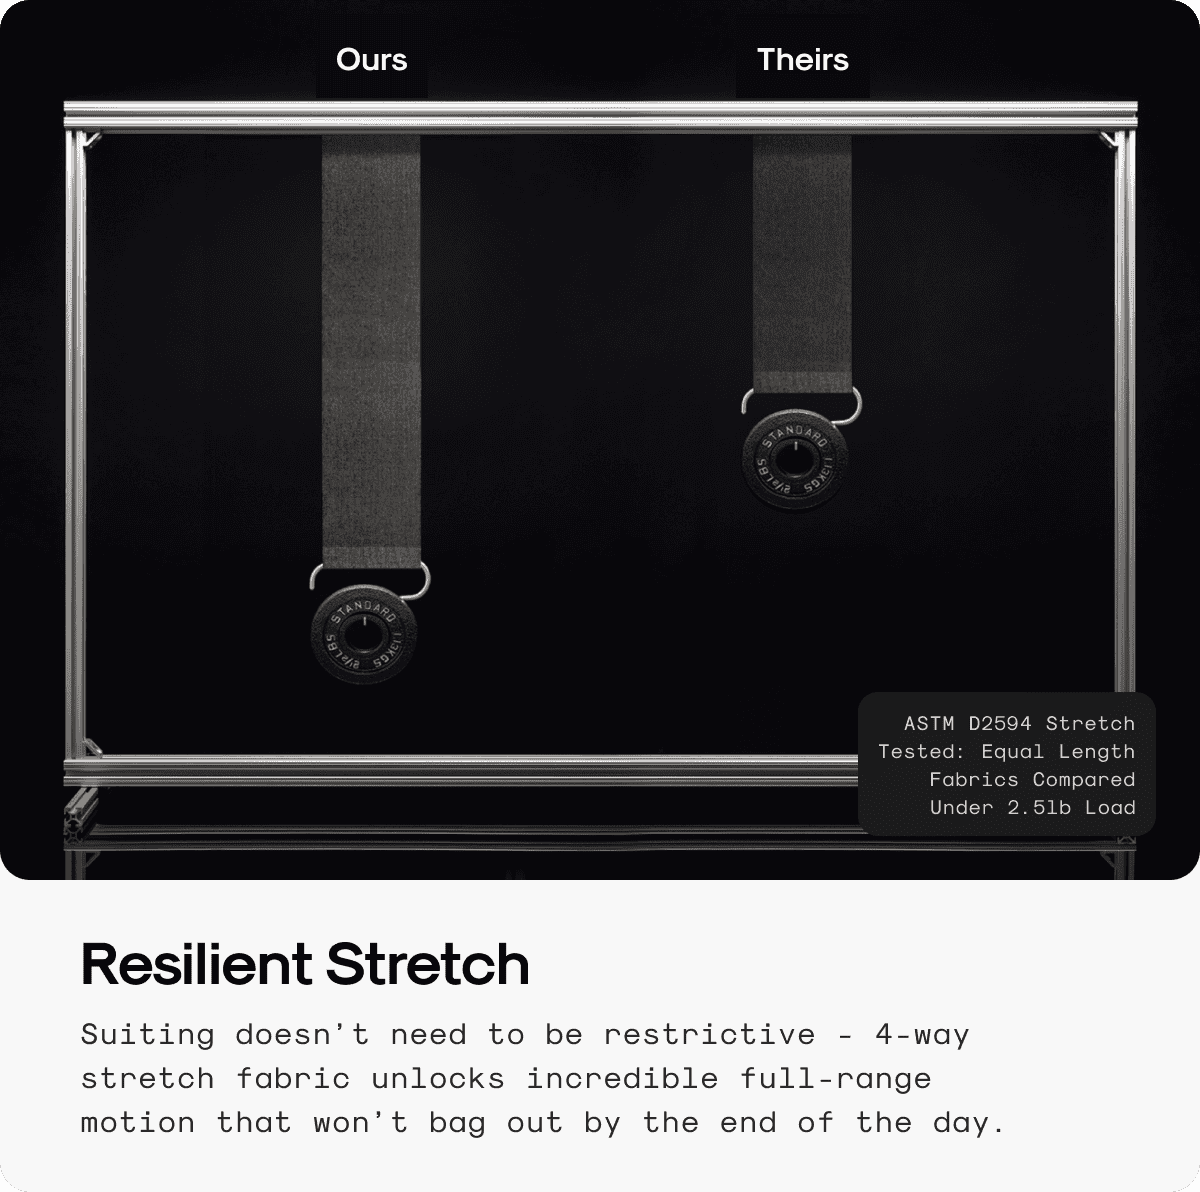 Resilient Stretch